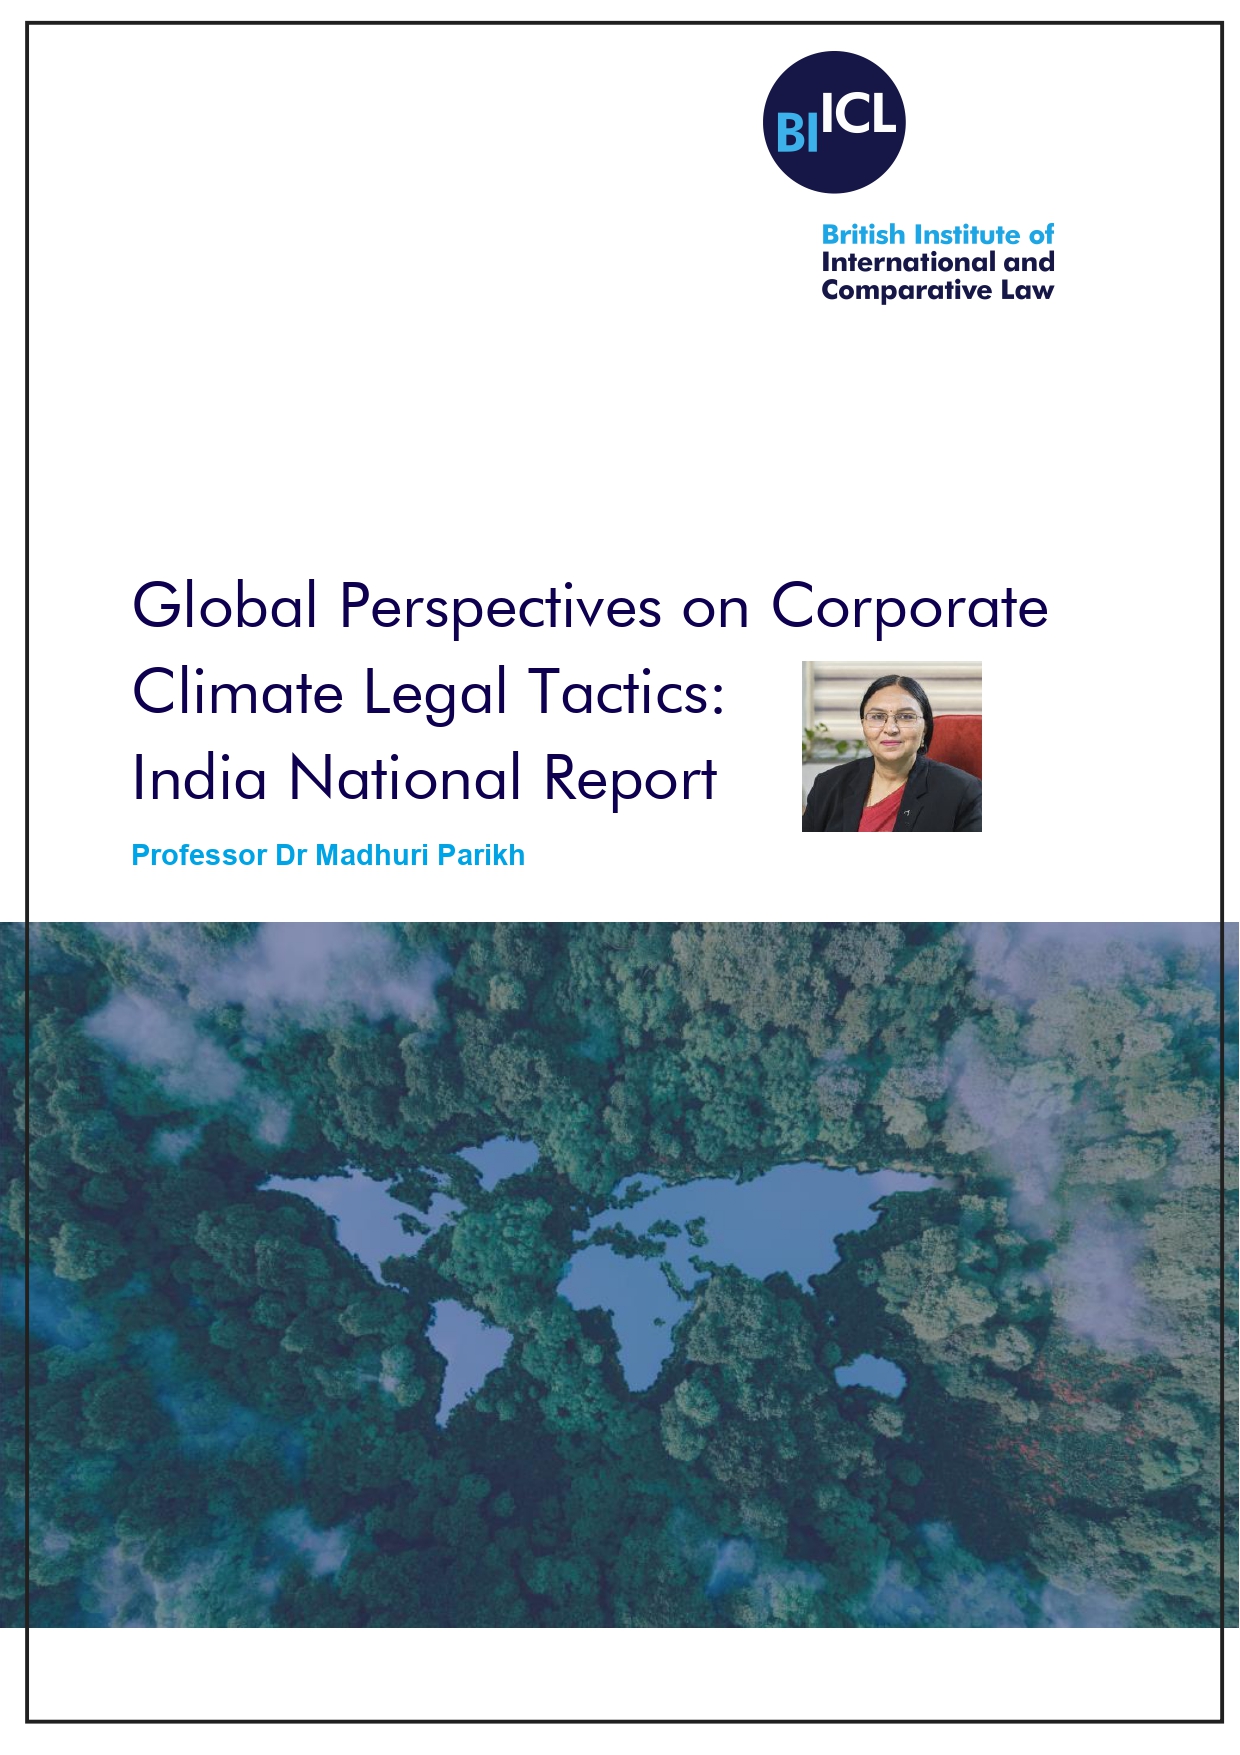 Global Perspectives on Corporate Climate Legal Tactics: India National Report